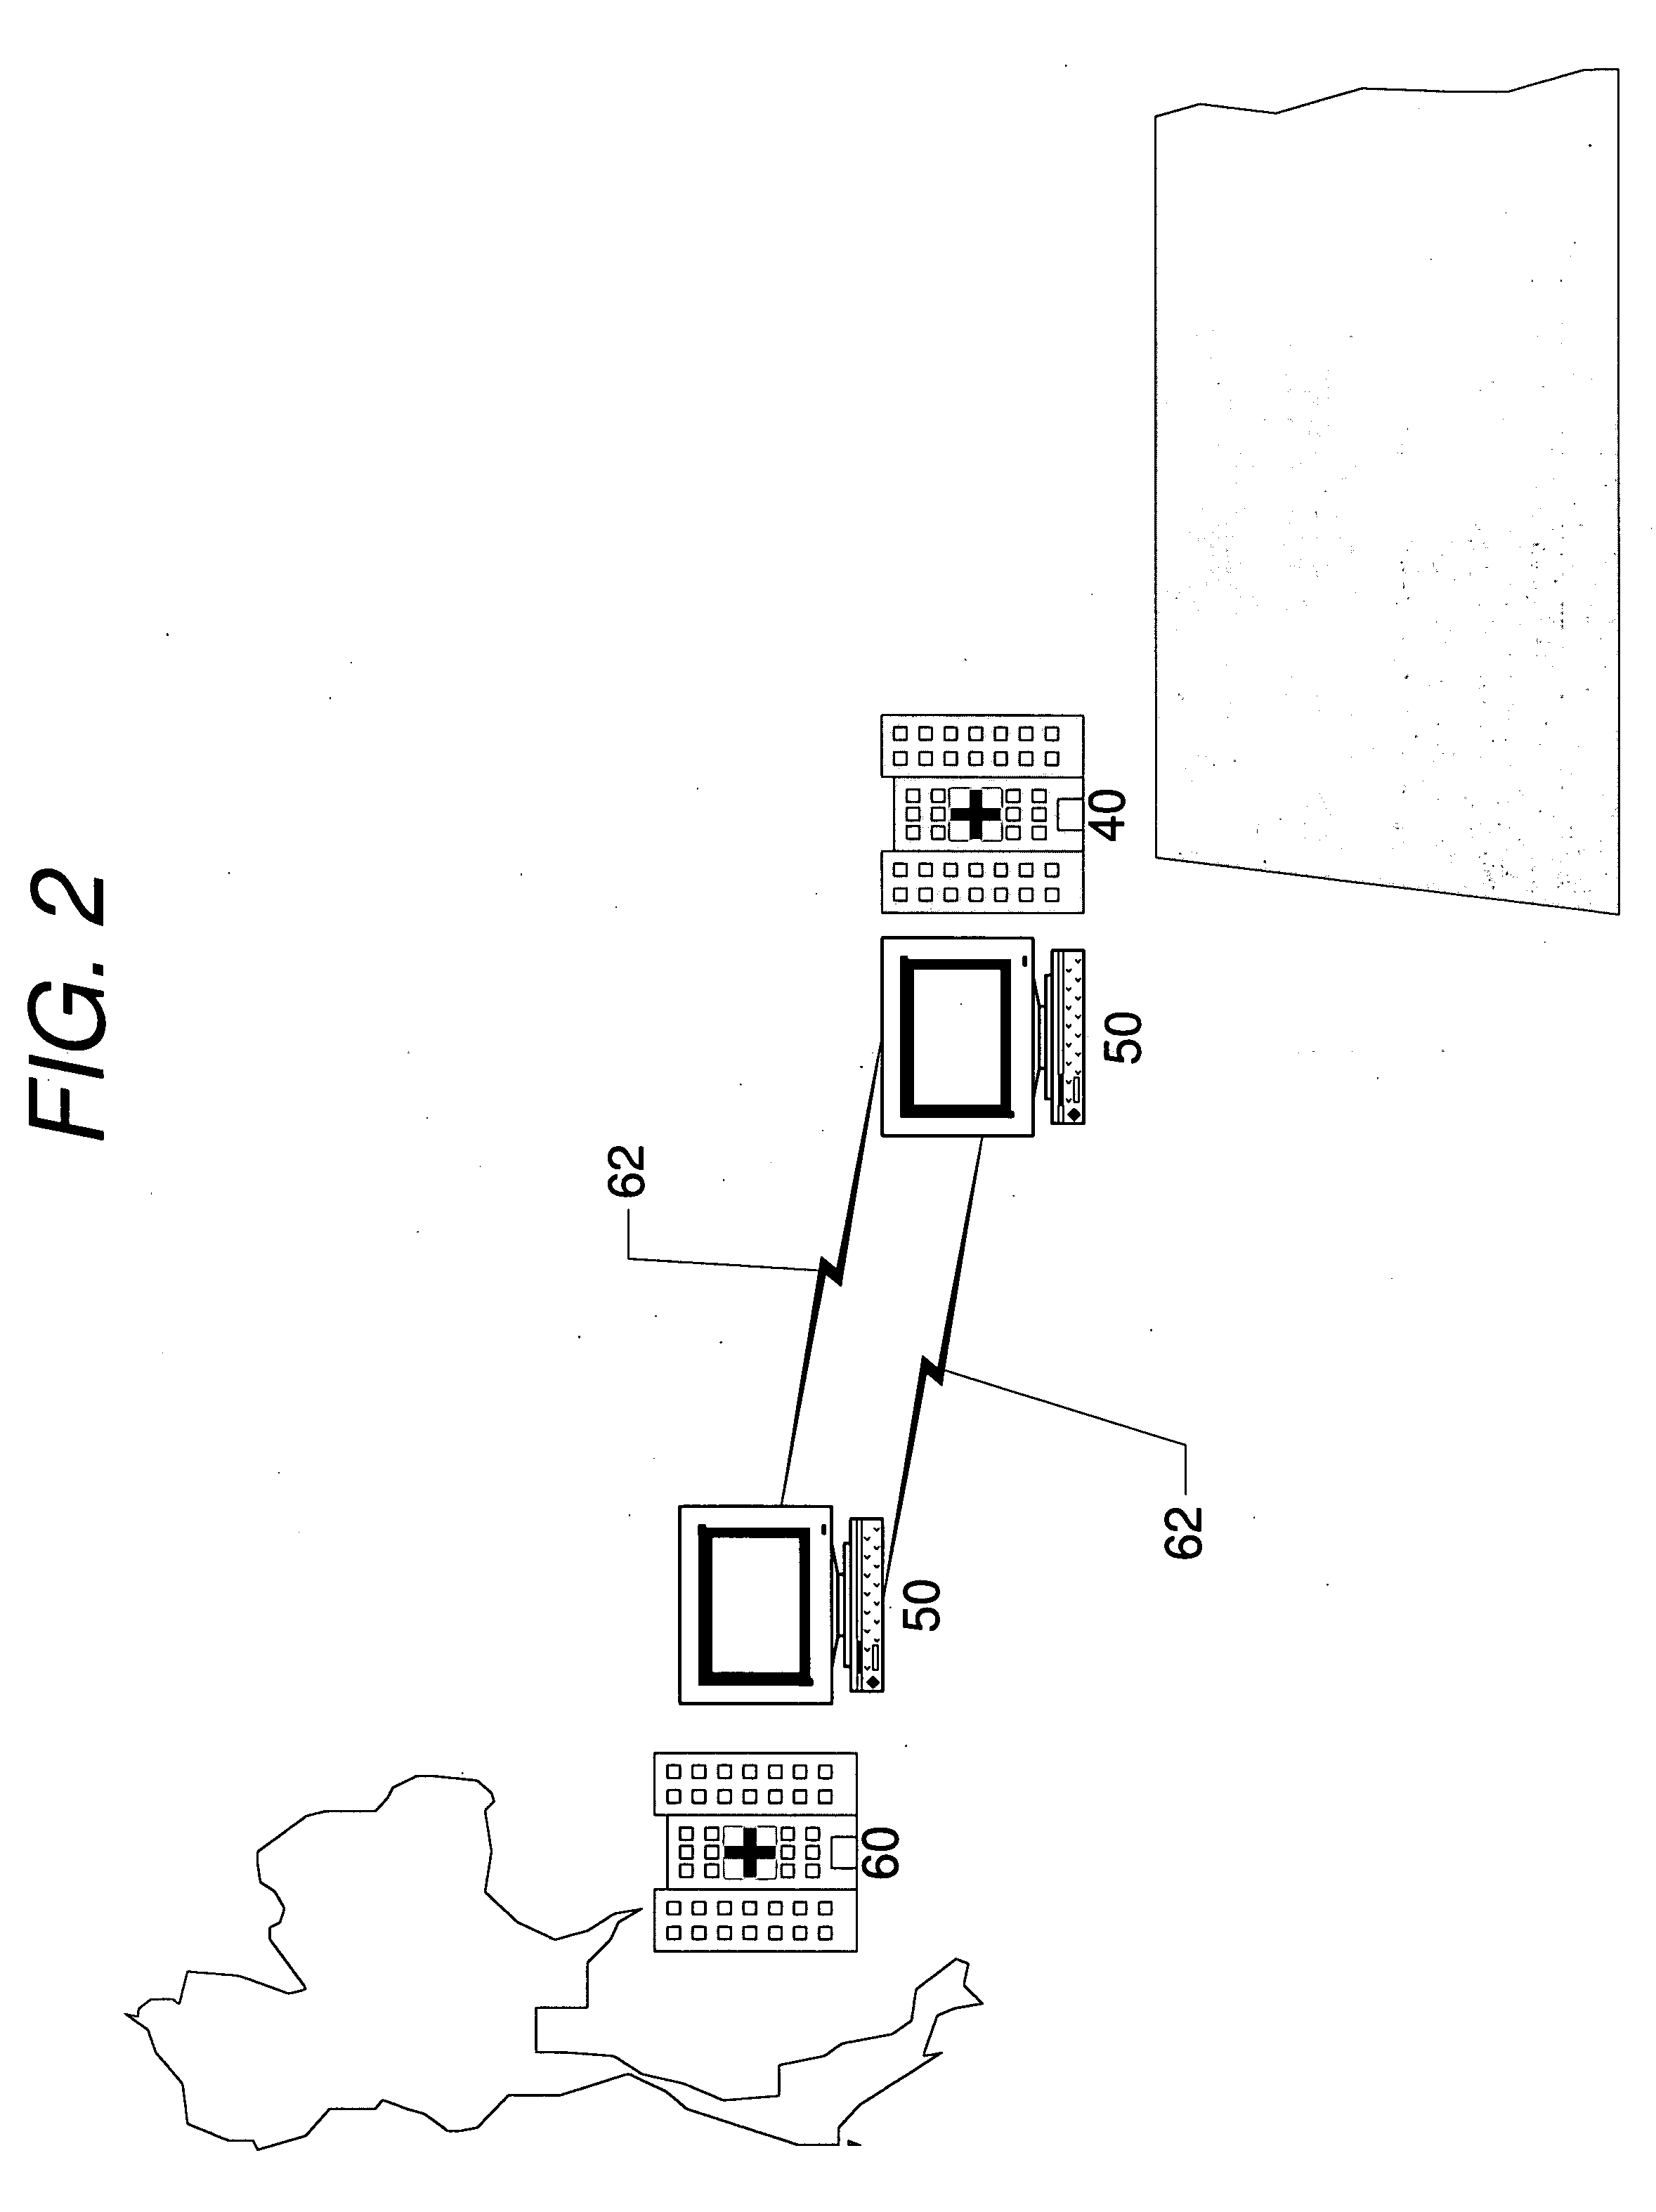 Methods and processes for a health care system